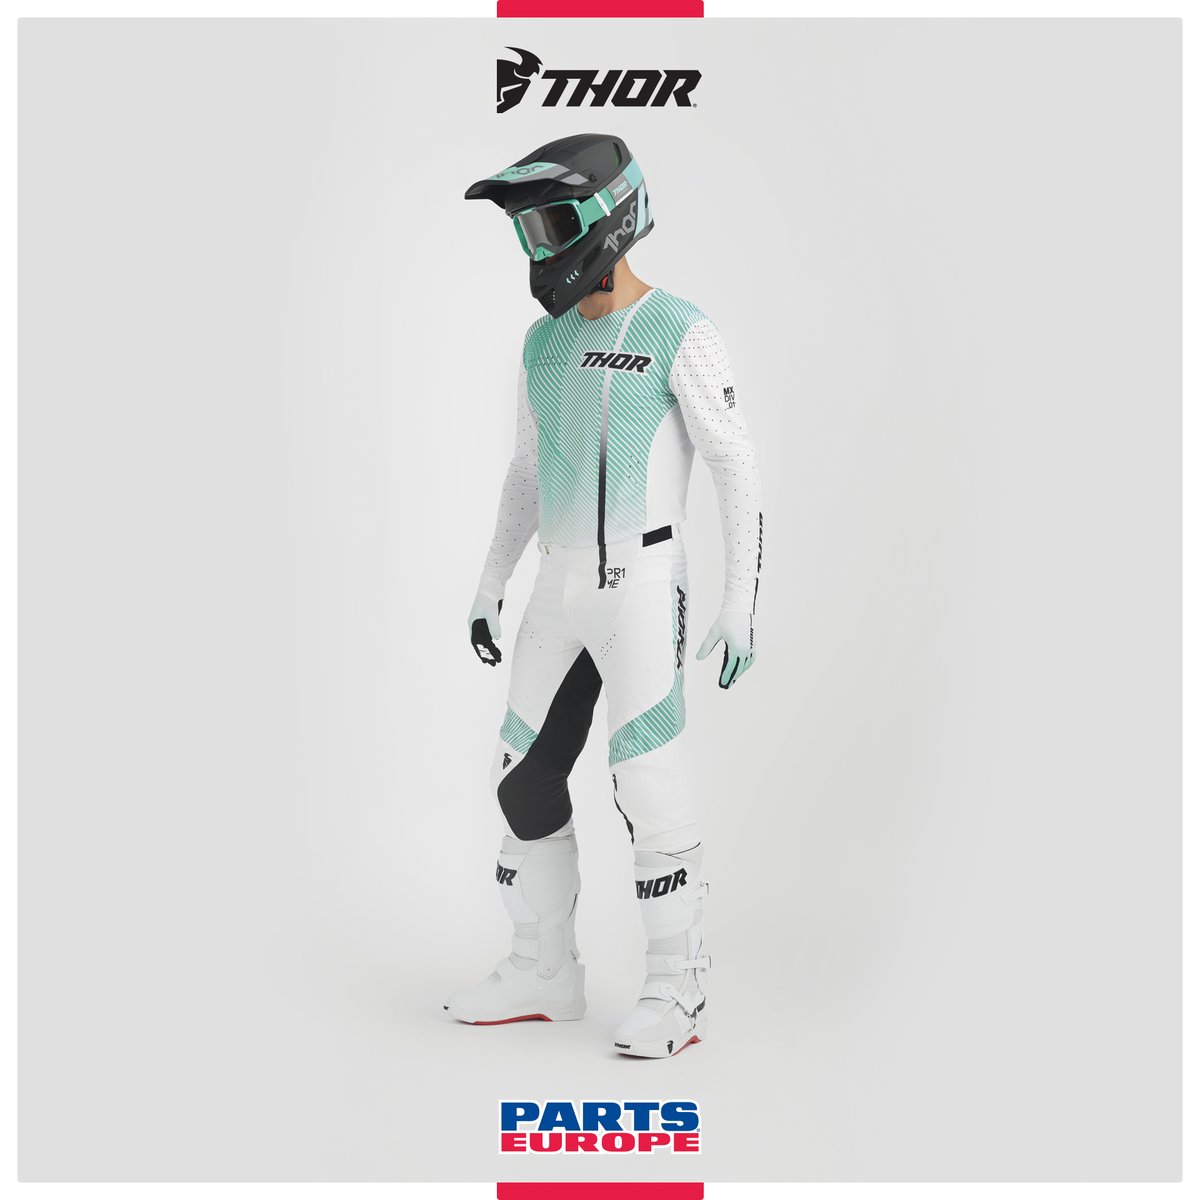 Get the Gear! 
-
Prime Tech White/Teal.
All Collection 👉 bit.ly/THOR2023Web

#BuiltForThis #THORMX #WeSupportTheSport #PartsEurope #motocross #braap THOR MX